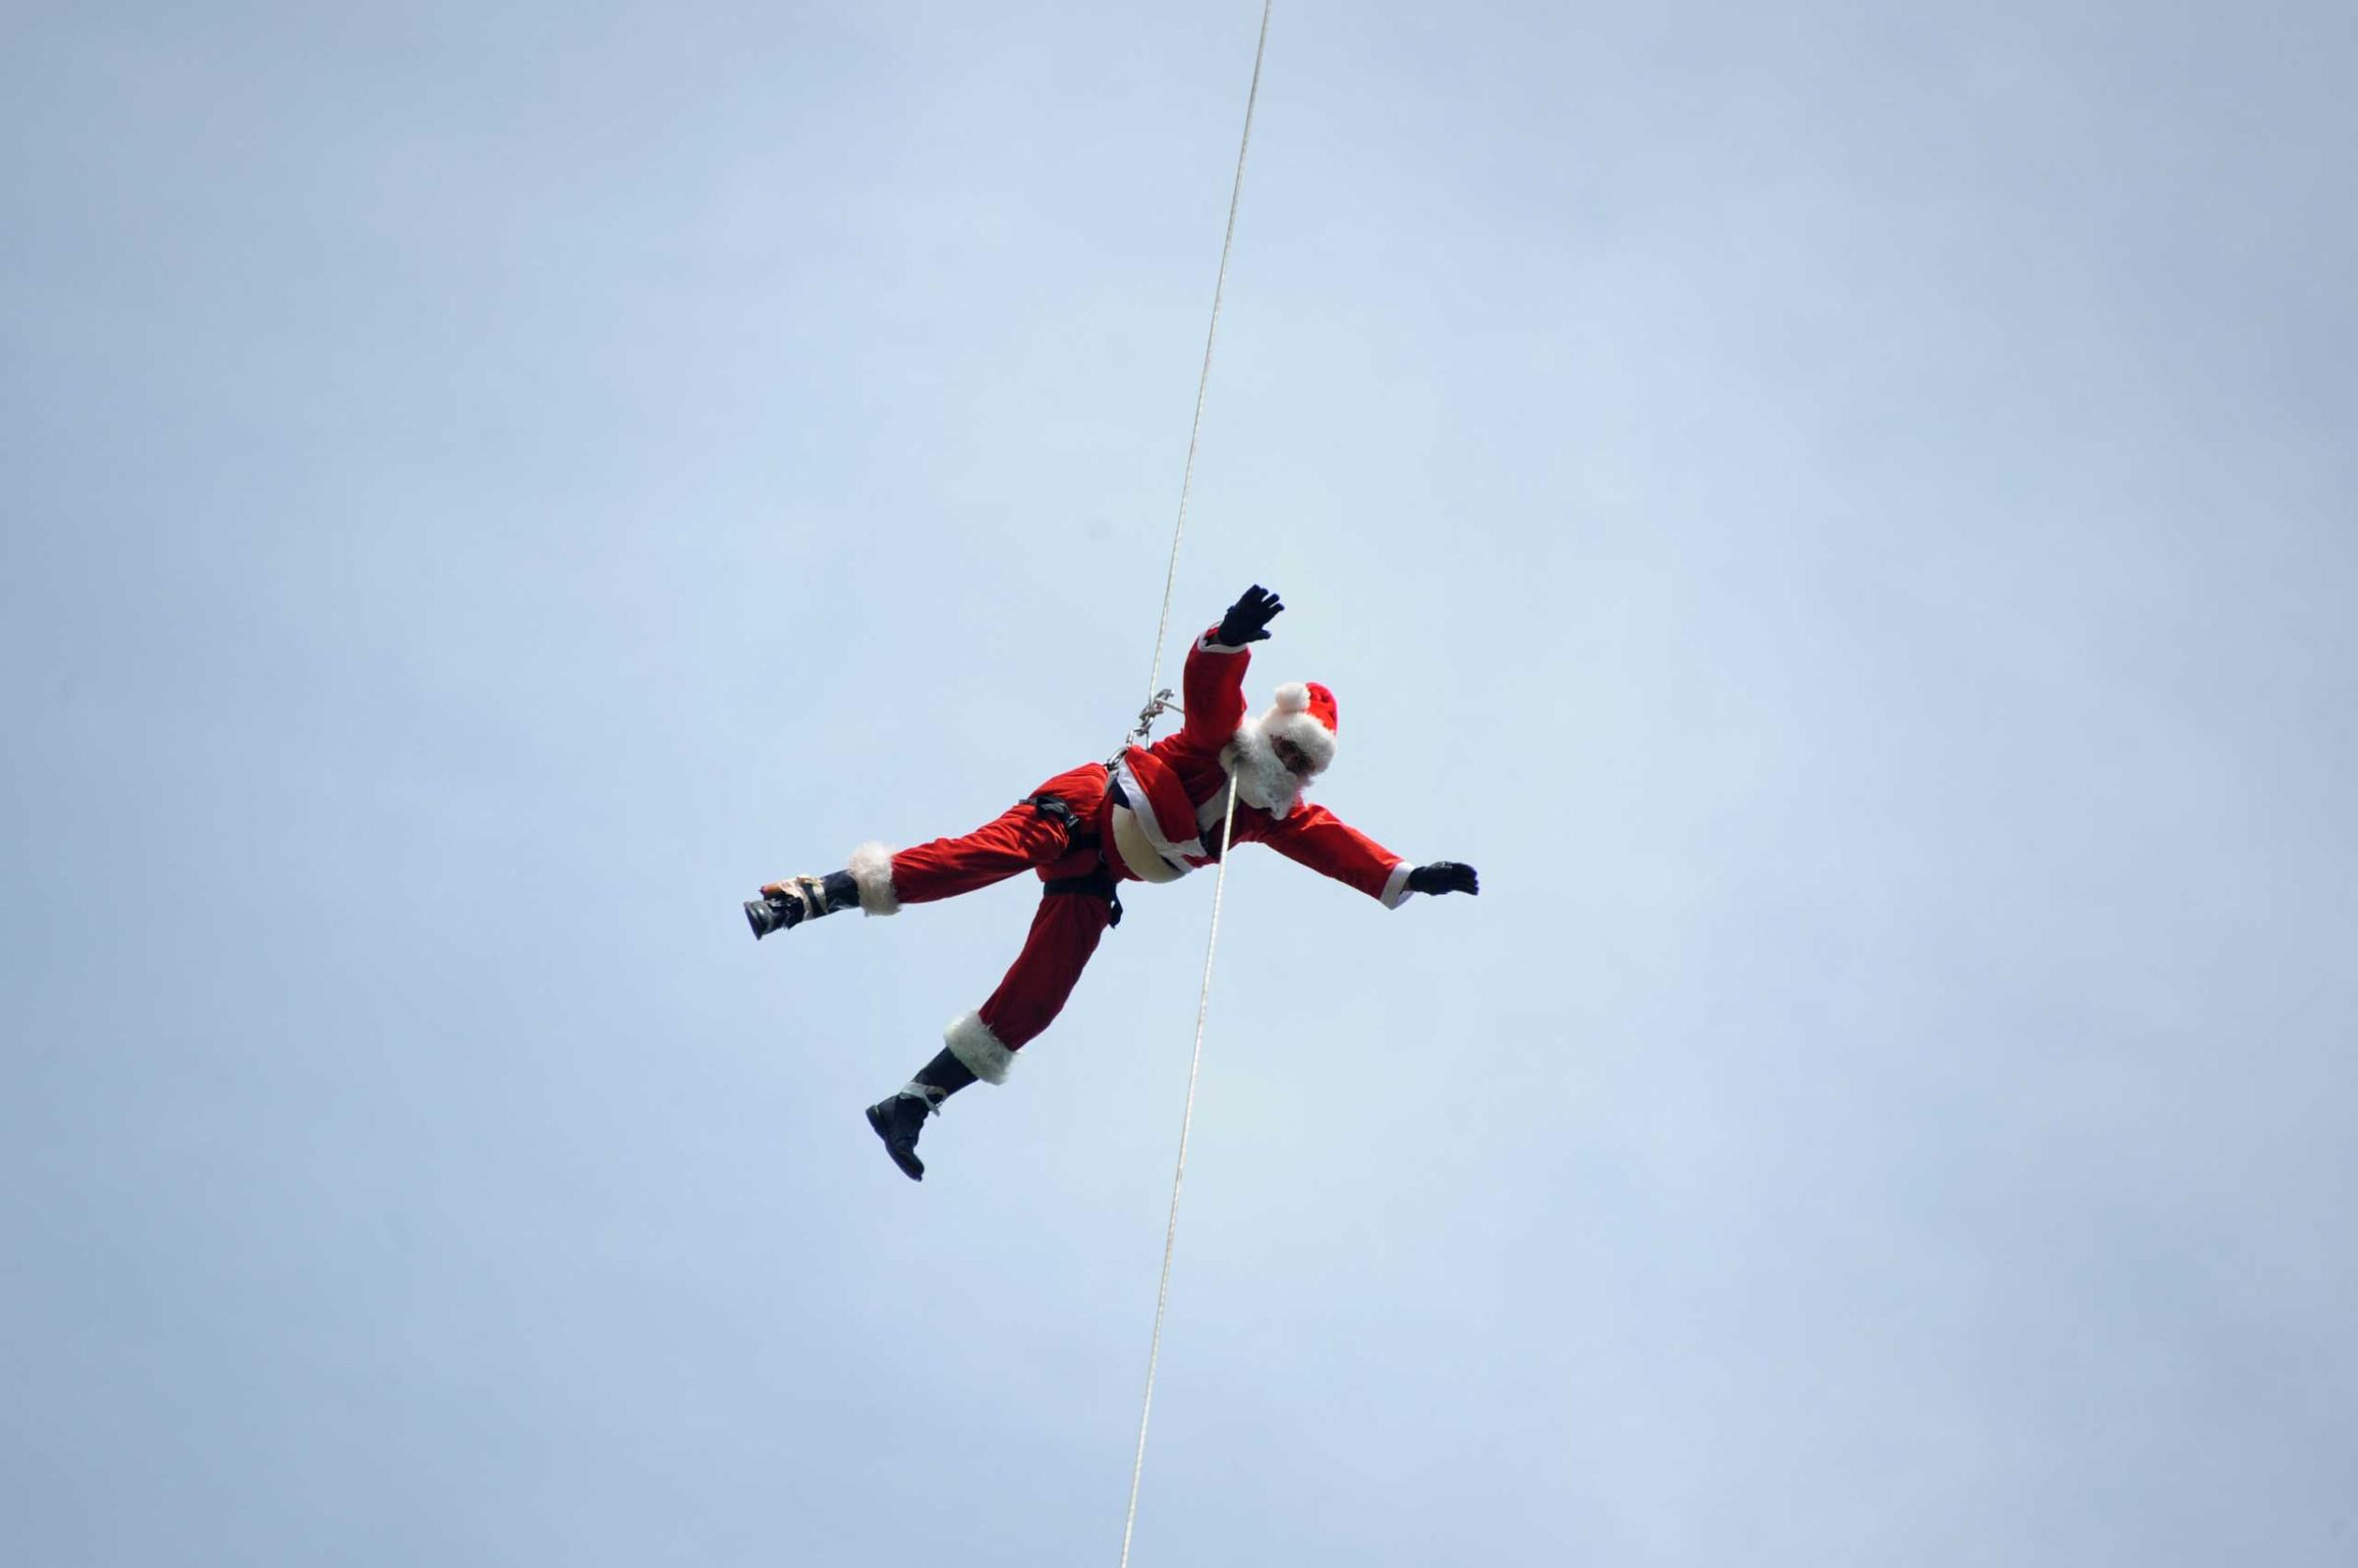 Guatemalan firefighter Hector Chacon dressed as Santa Claus goes down a cable from a bridge to deliver presents to children in Guatemala City on Dec. 21, 2014.